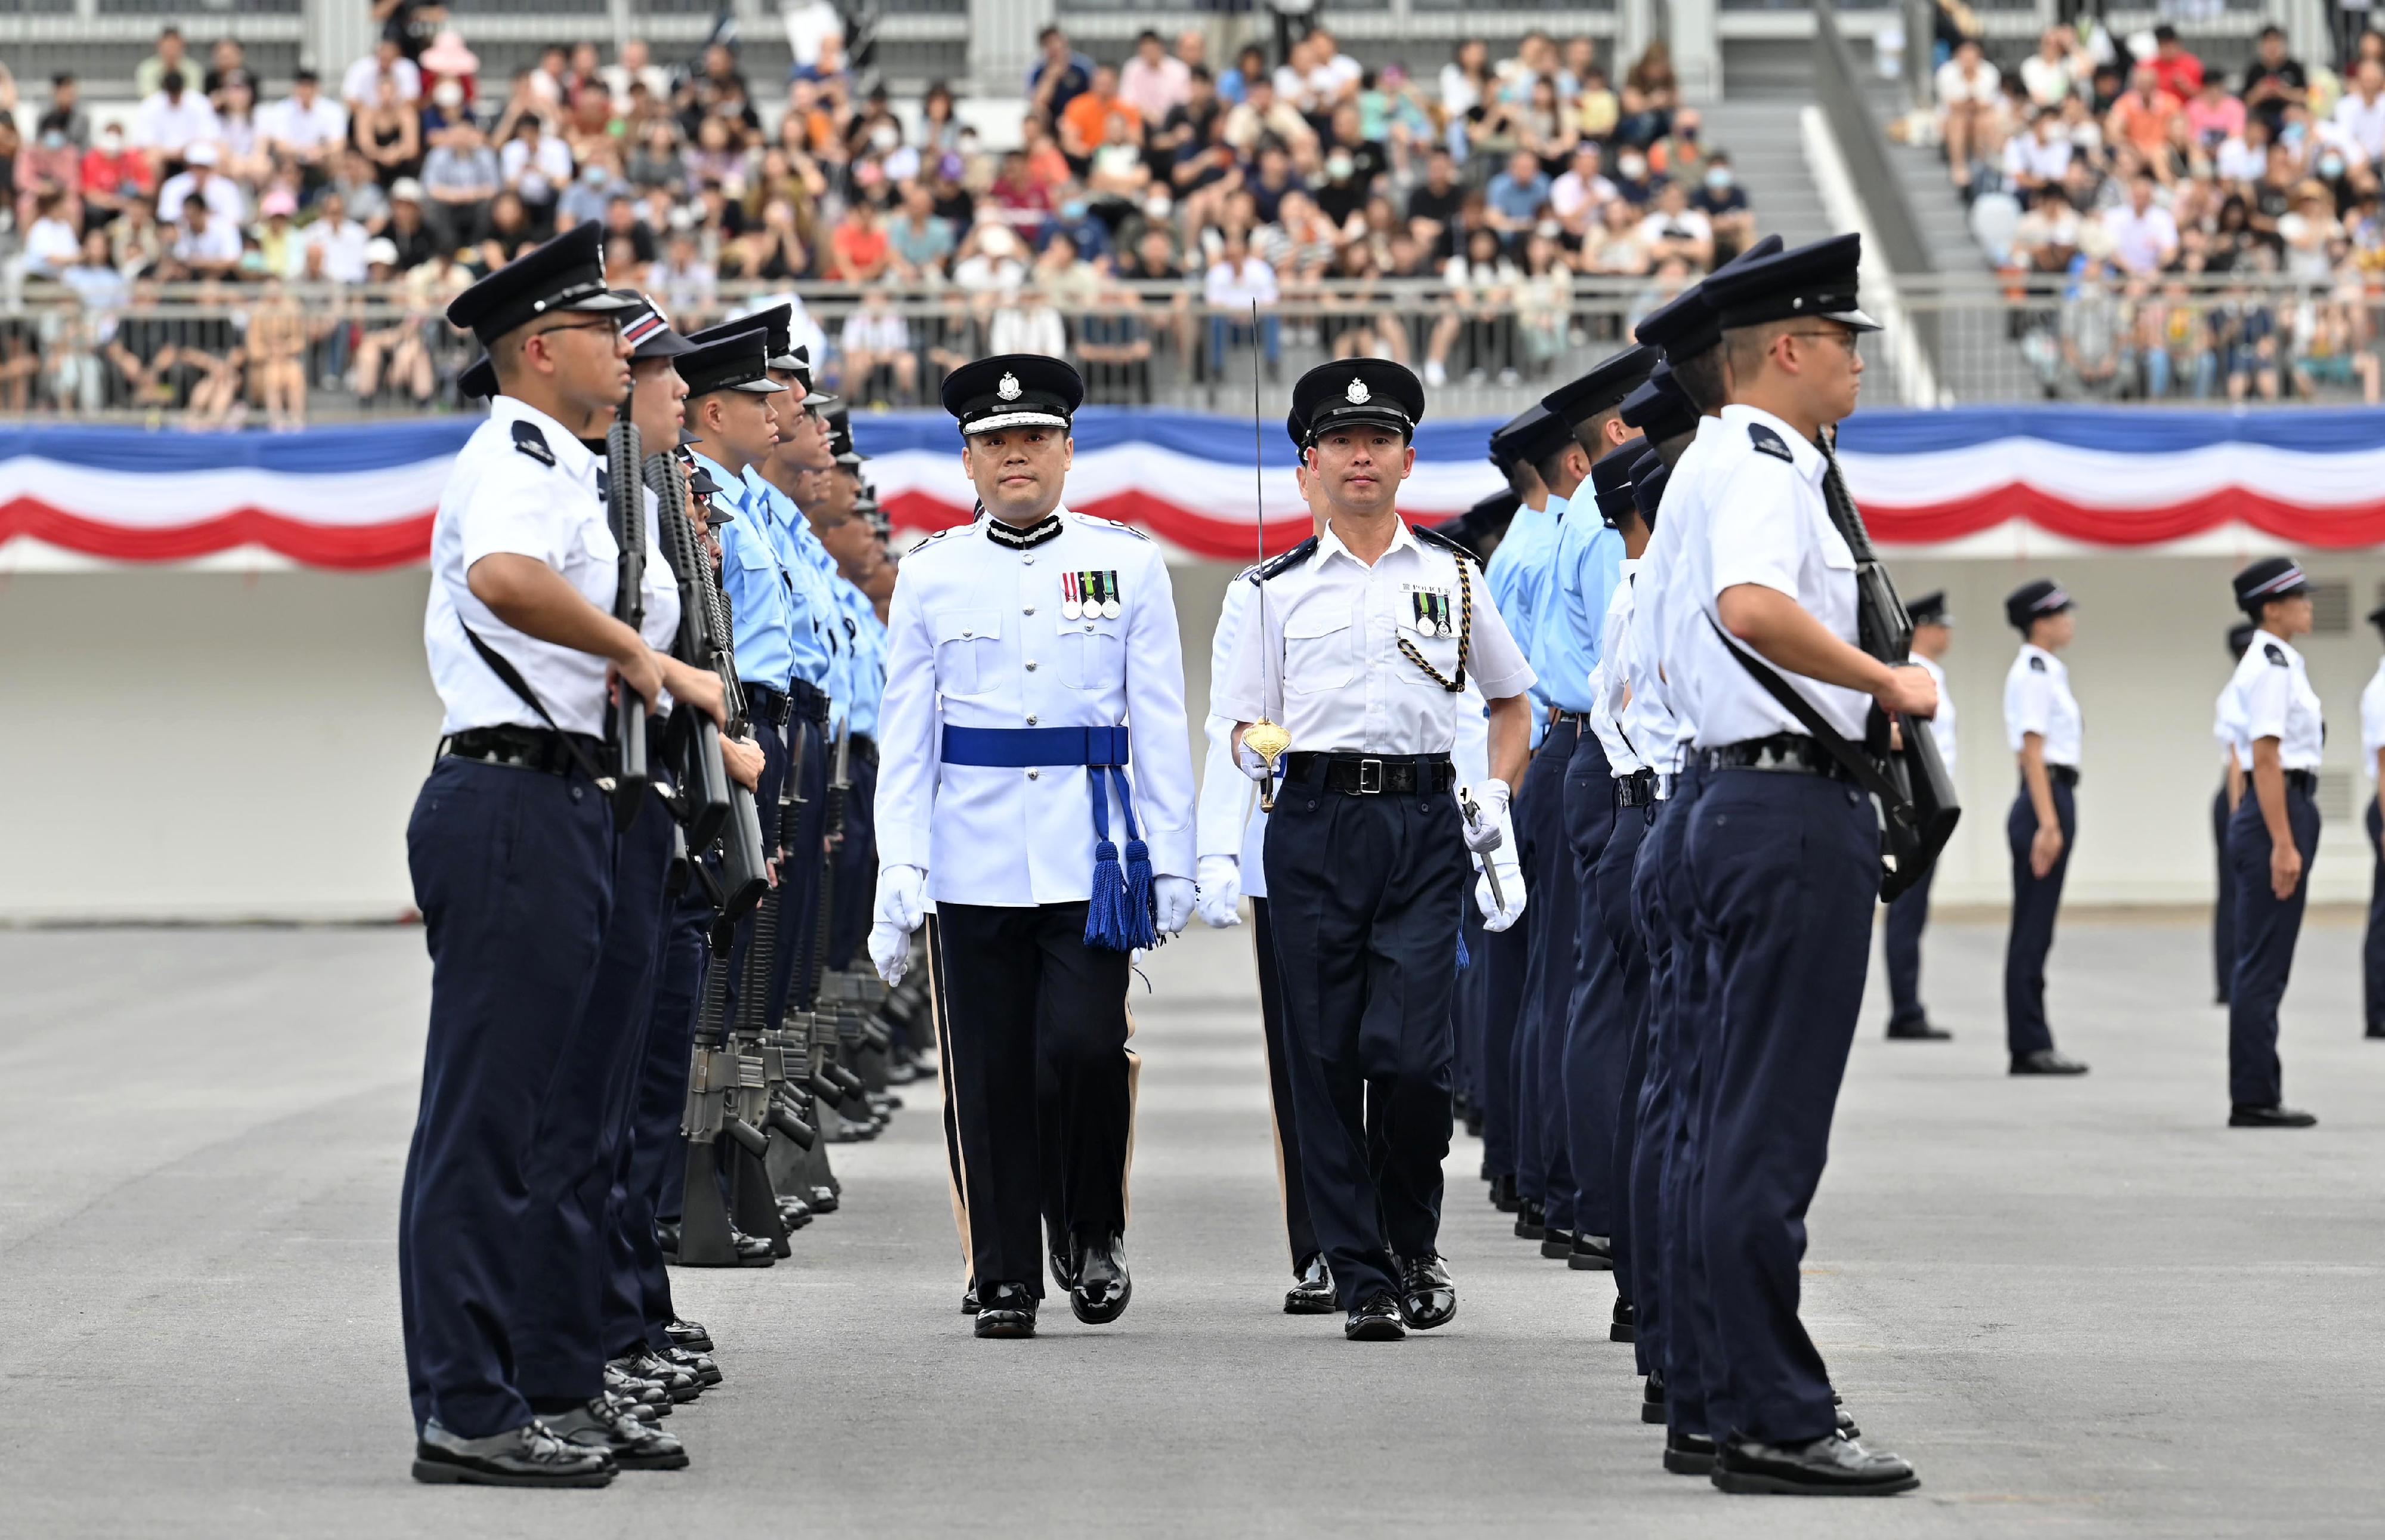 The Deputy Commissioner of Police (Operations), Mr Yuen Yuk-kin, inspects a passing-out parade as a reviewing officer at the Hong Kong Police College today (June 24).